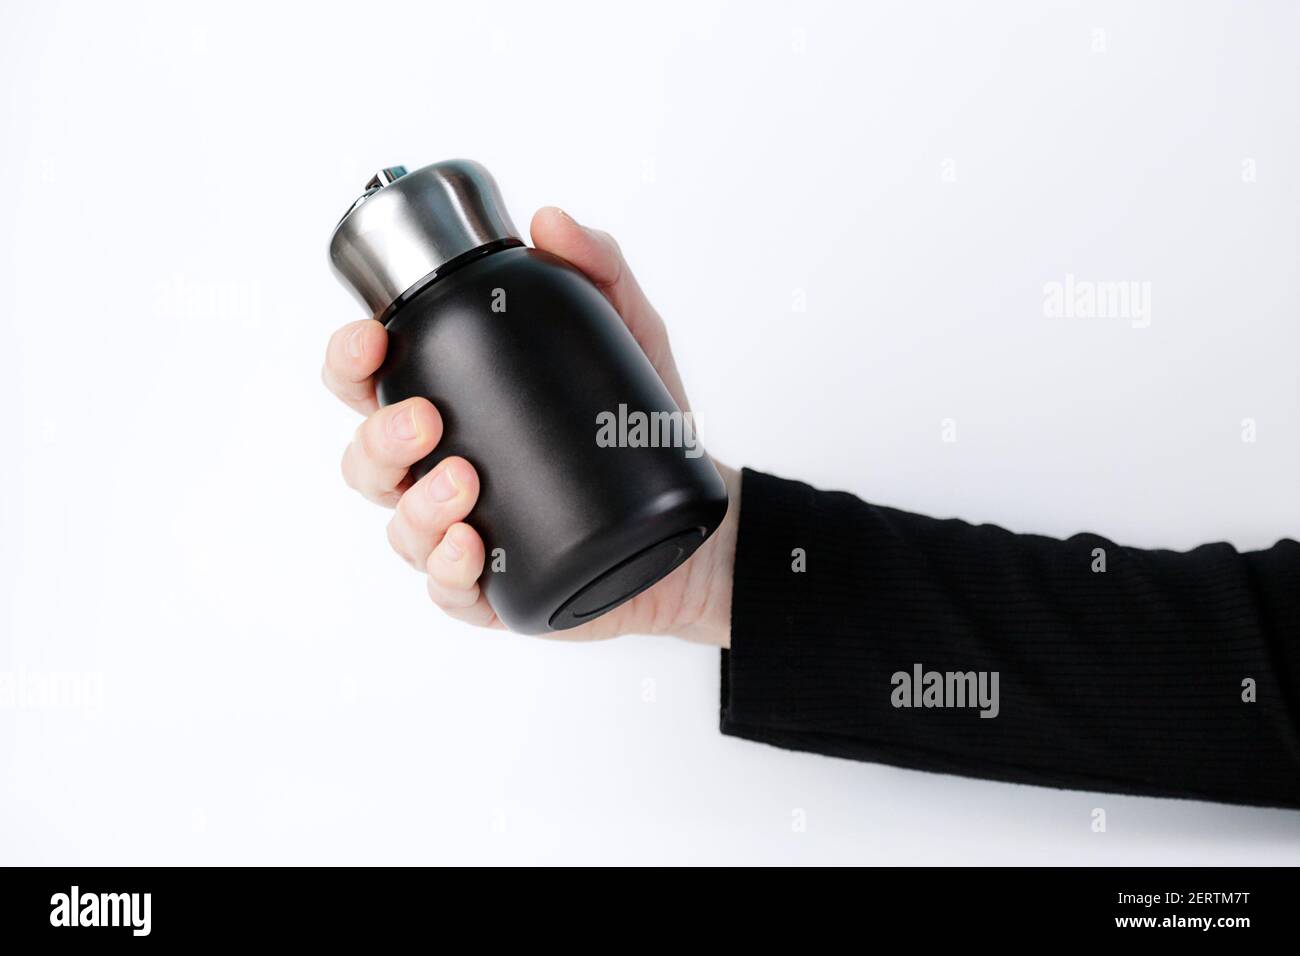 Woman hand showing a black reusable, steel thermo water bottle, isolated on white background. Zero waste. Environment concept. Stock Photo